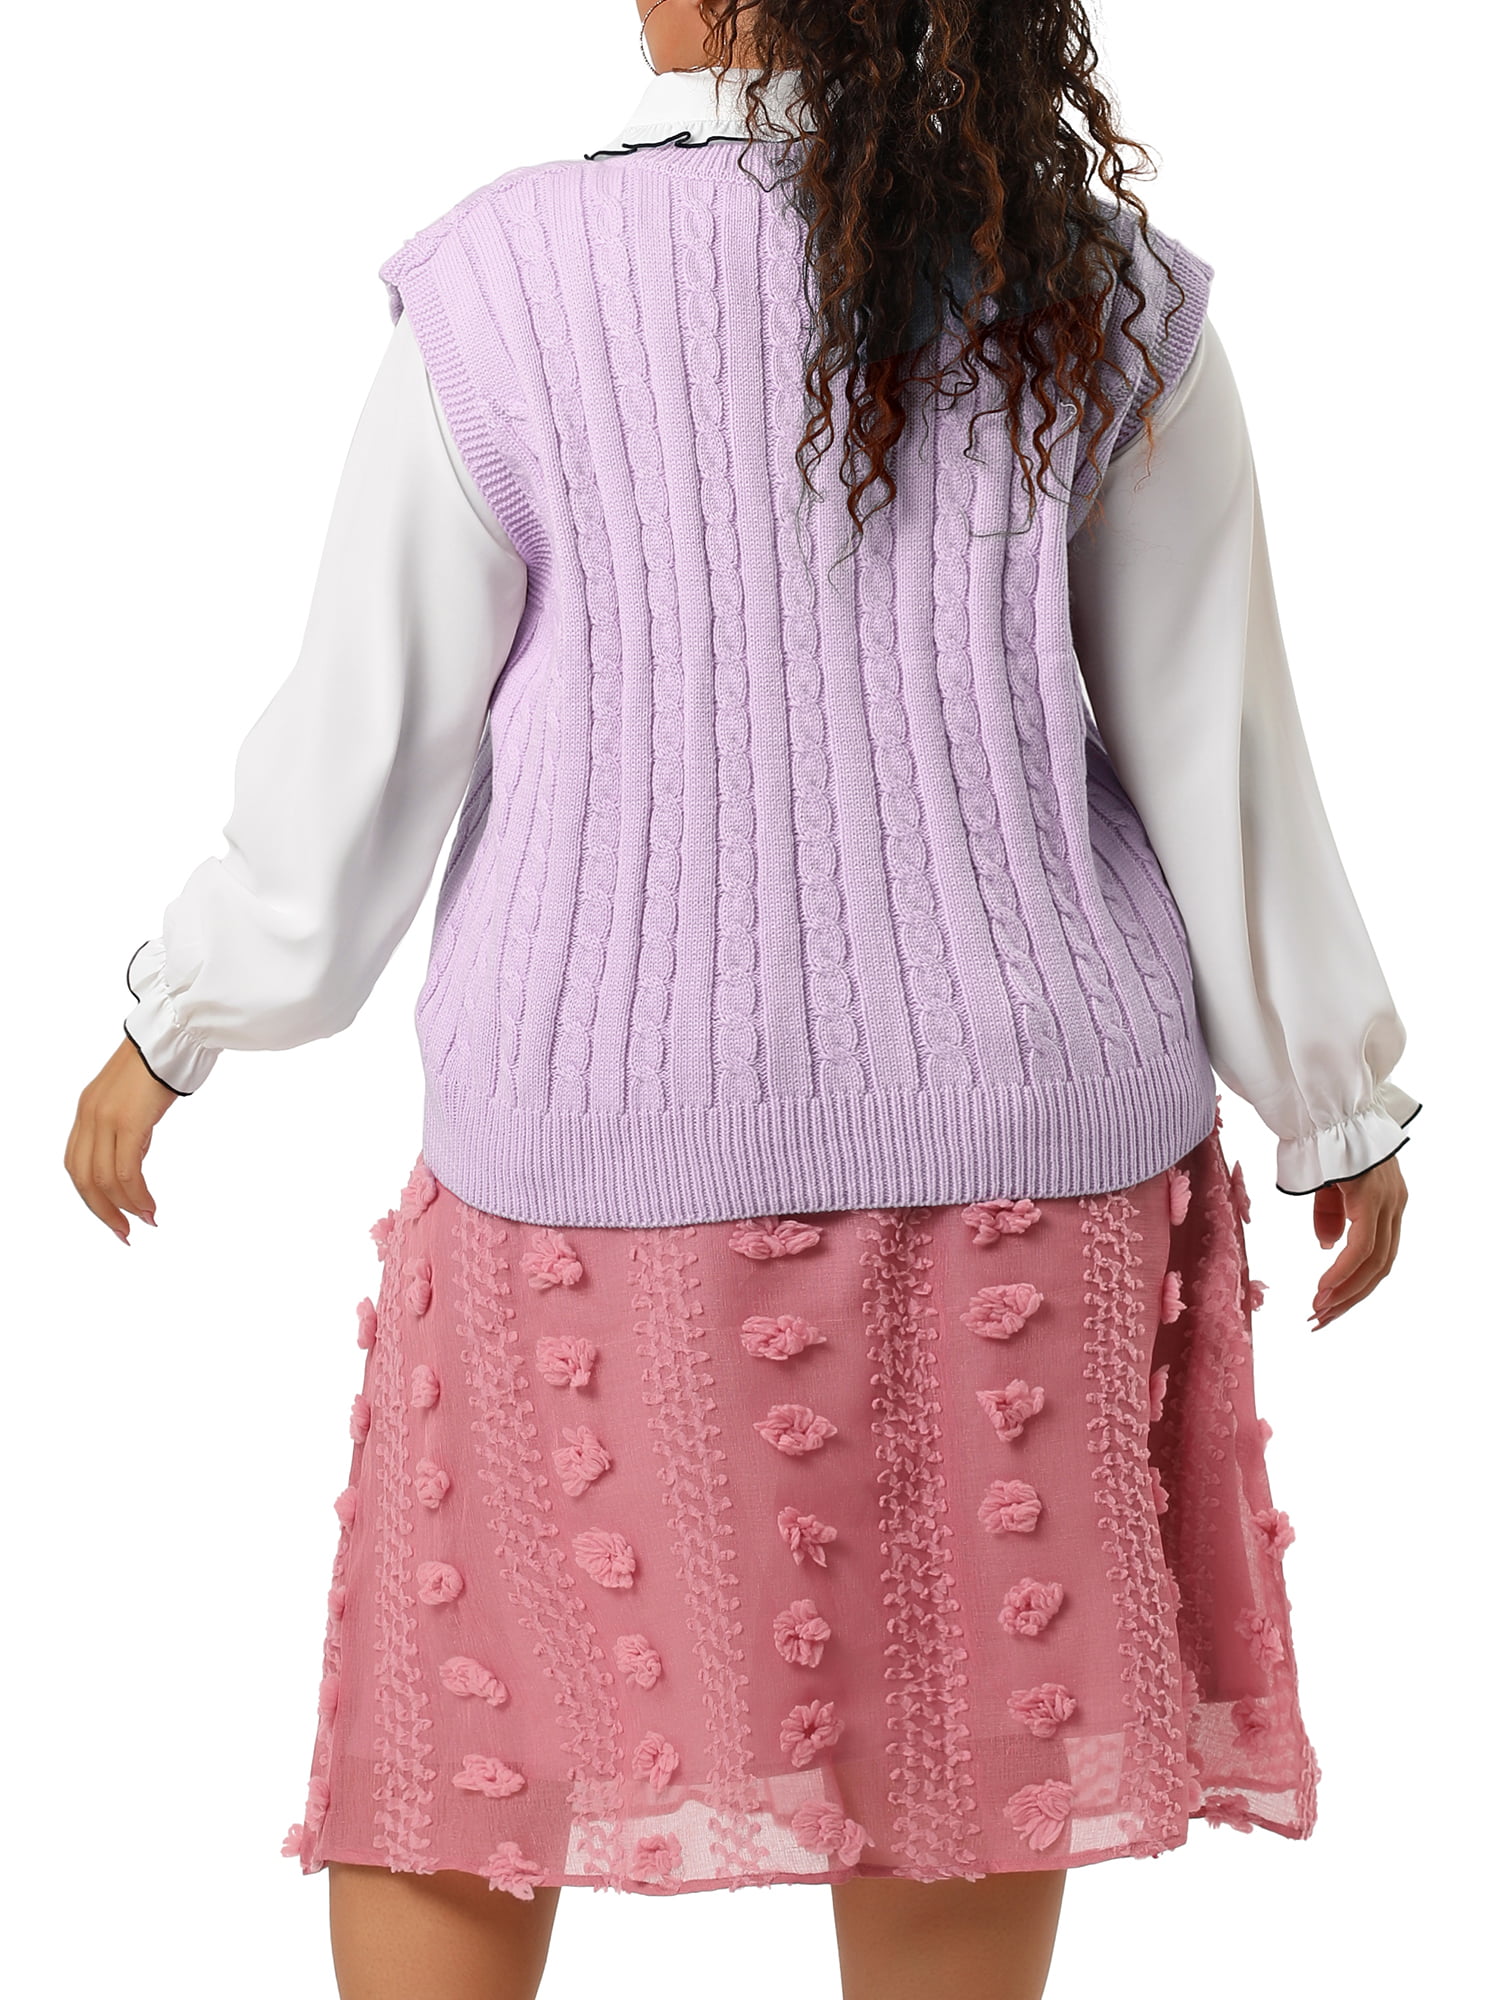 Agnes Orinda Women's Plus Size Winter Outfits V Neck Solid Knit Sweater  Vests 